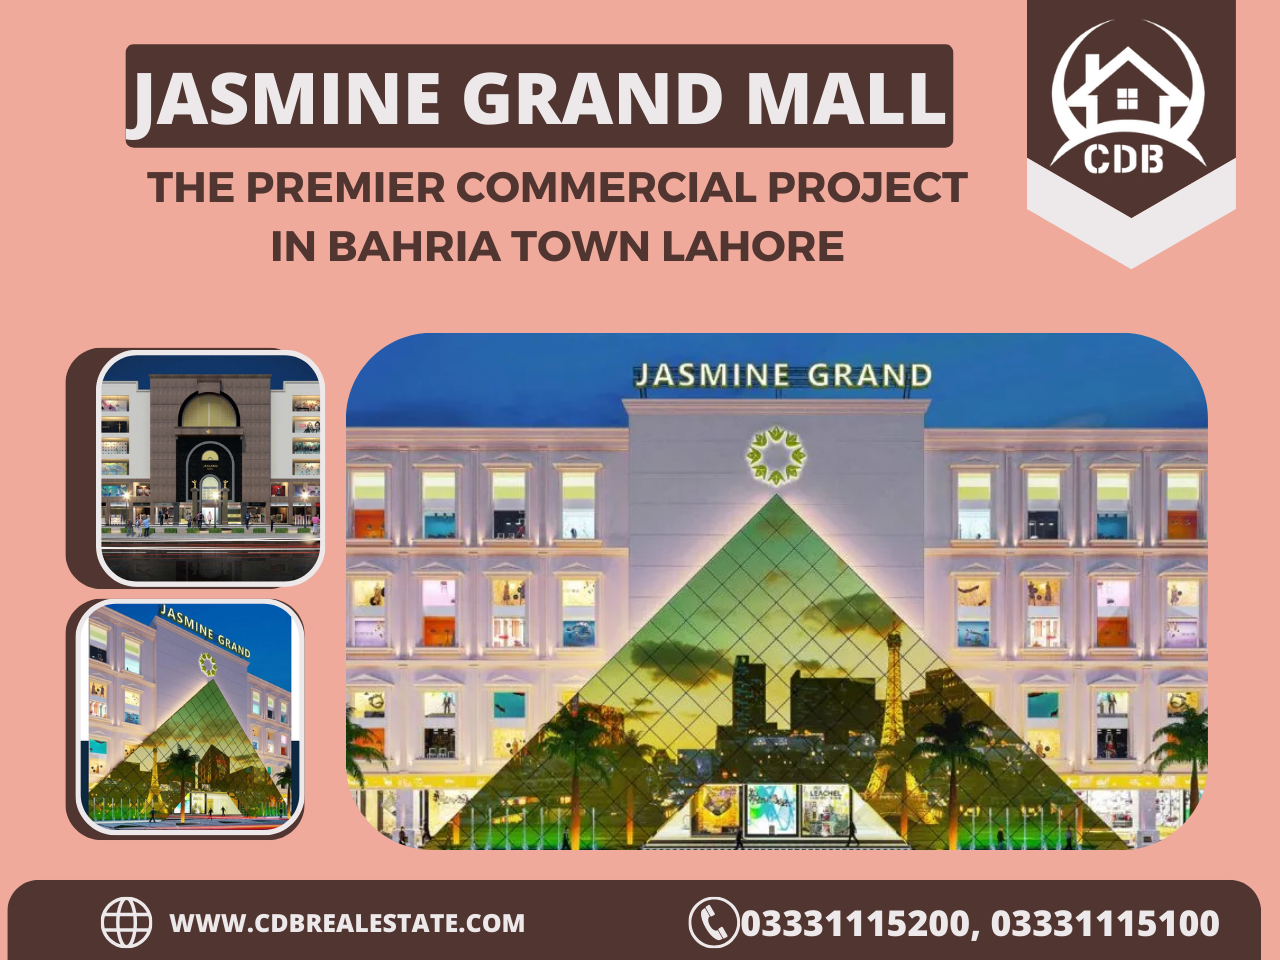 Jasmine Grand Mall: The Premier Commercial Project in Bahria Town Lahore